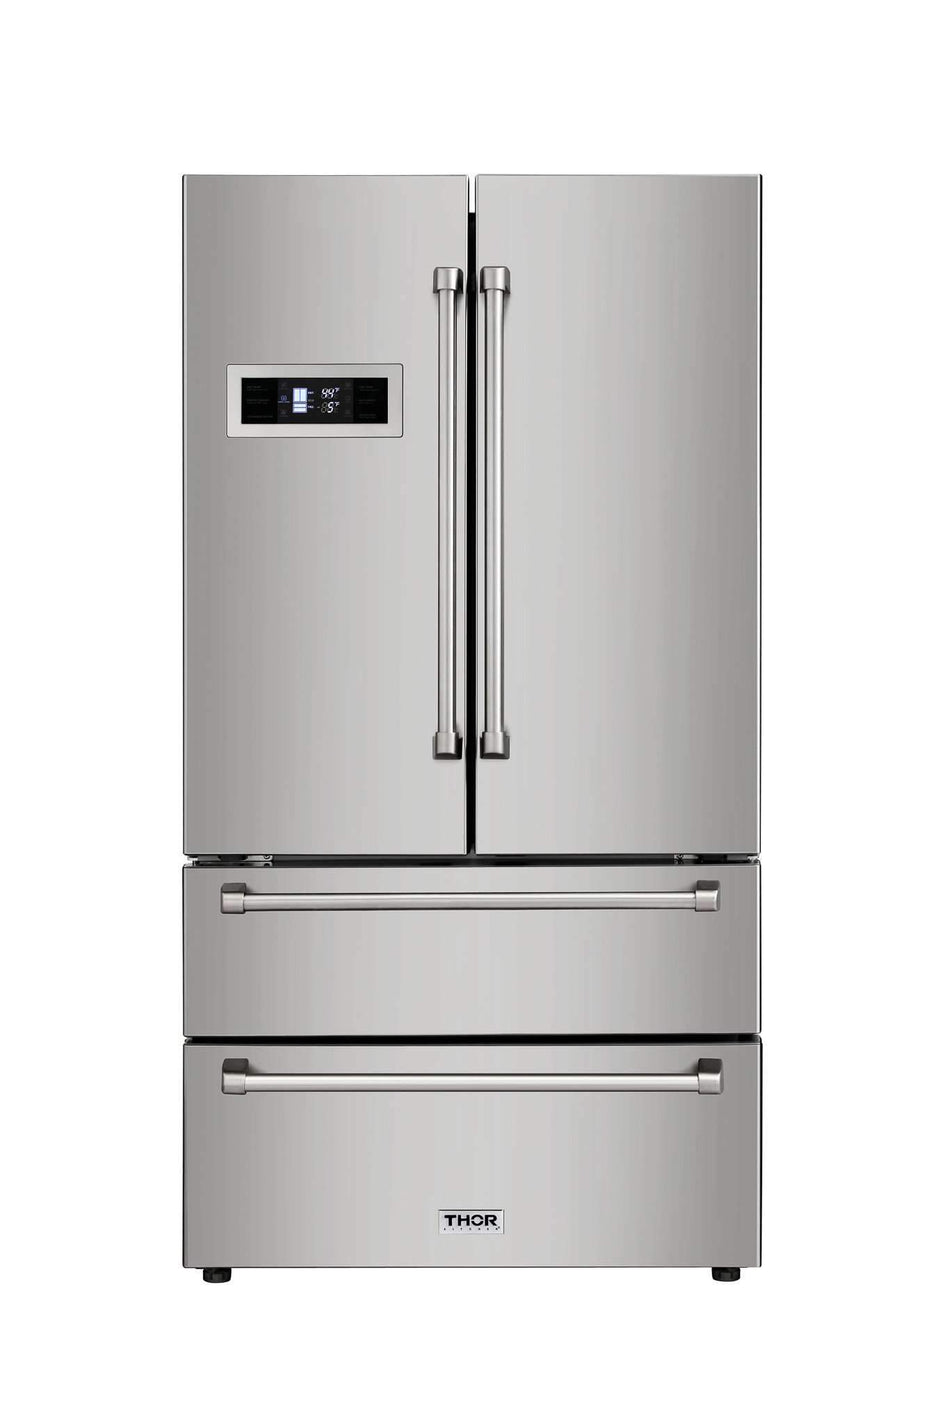 https://cdn.shopify.com/s/files/1/0513/0154/8231/products/thor-kitchen-french-door-refrigerator-in-stainless-steel-counter-depth-2085-cu-ft-hrf3601f-refrigerators-thor-kitchen-homeoutletdirect-683850.jpg?v=1674968890&width=950